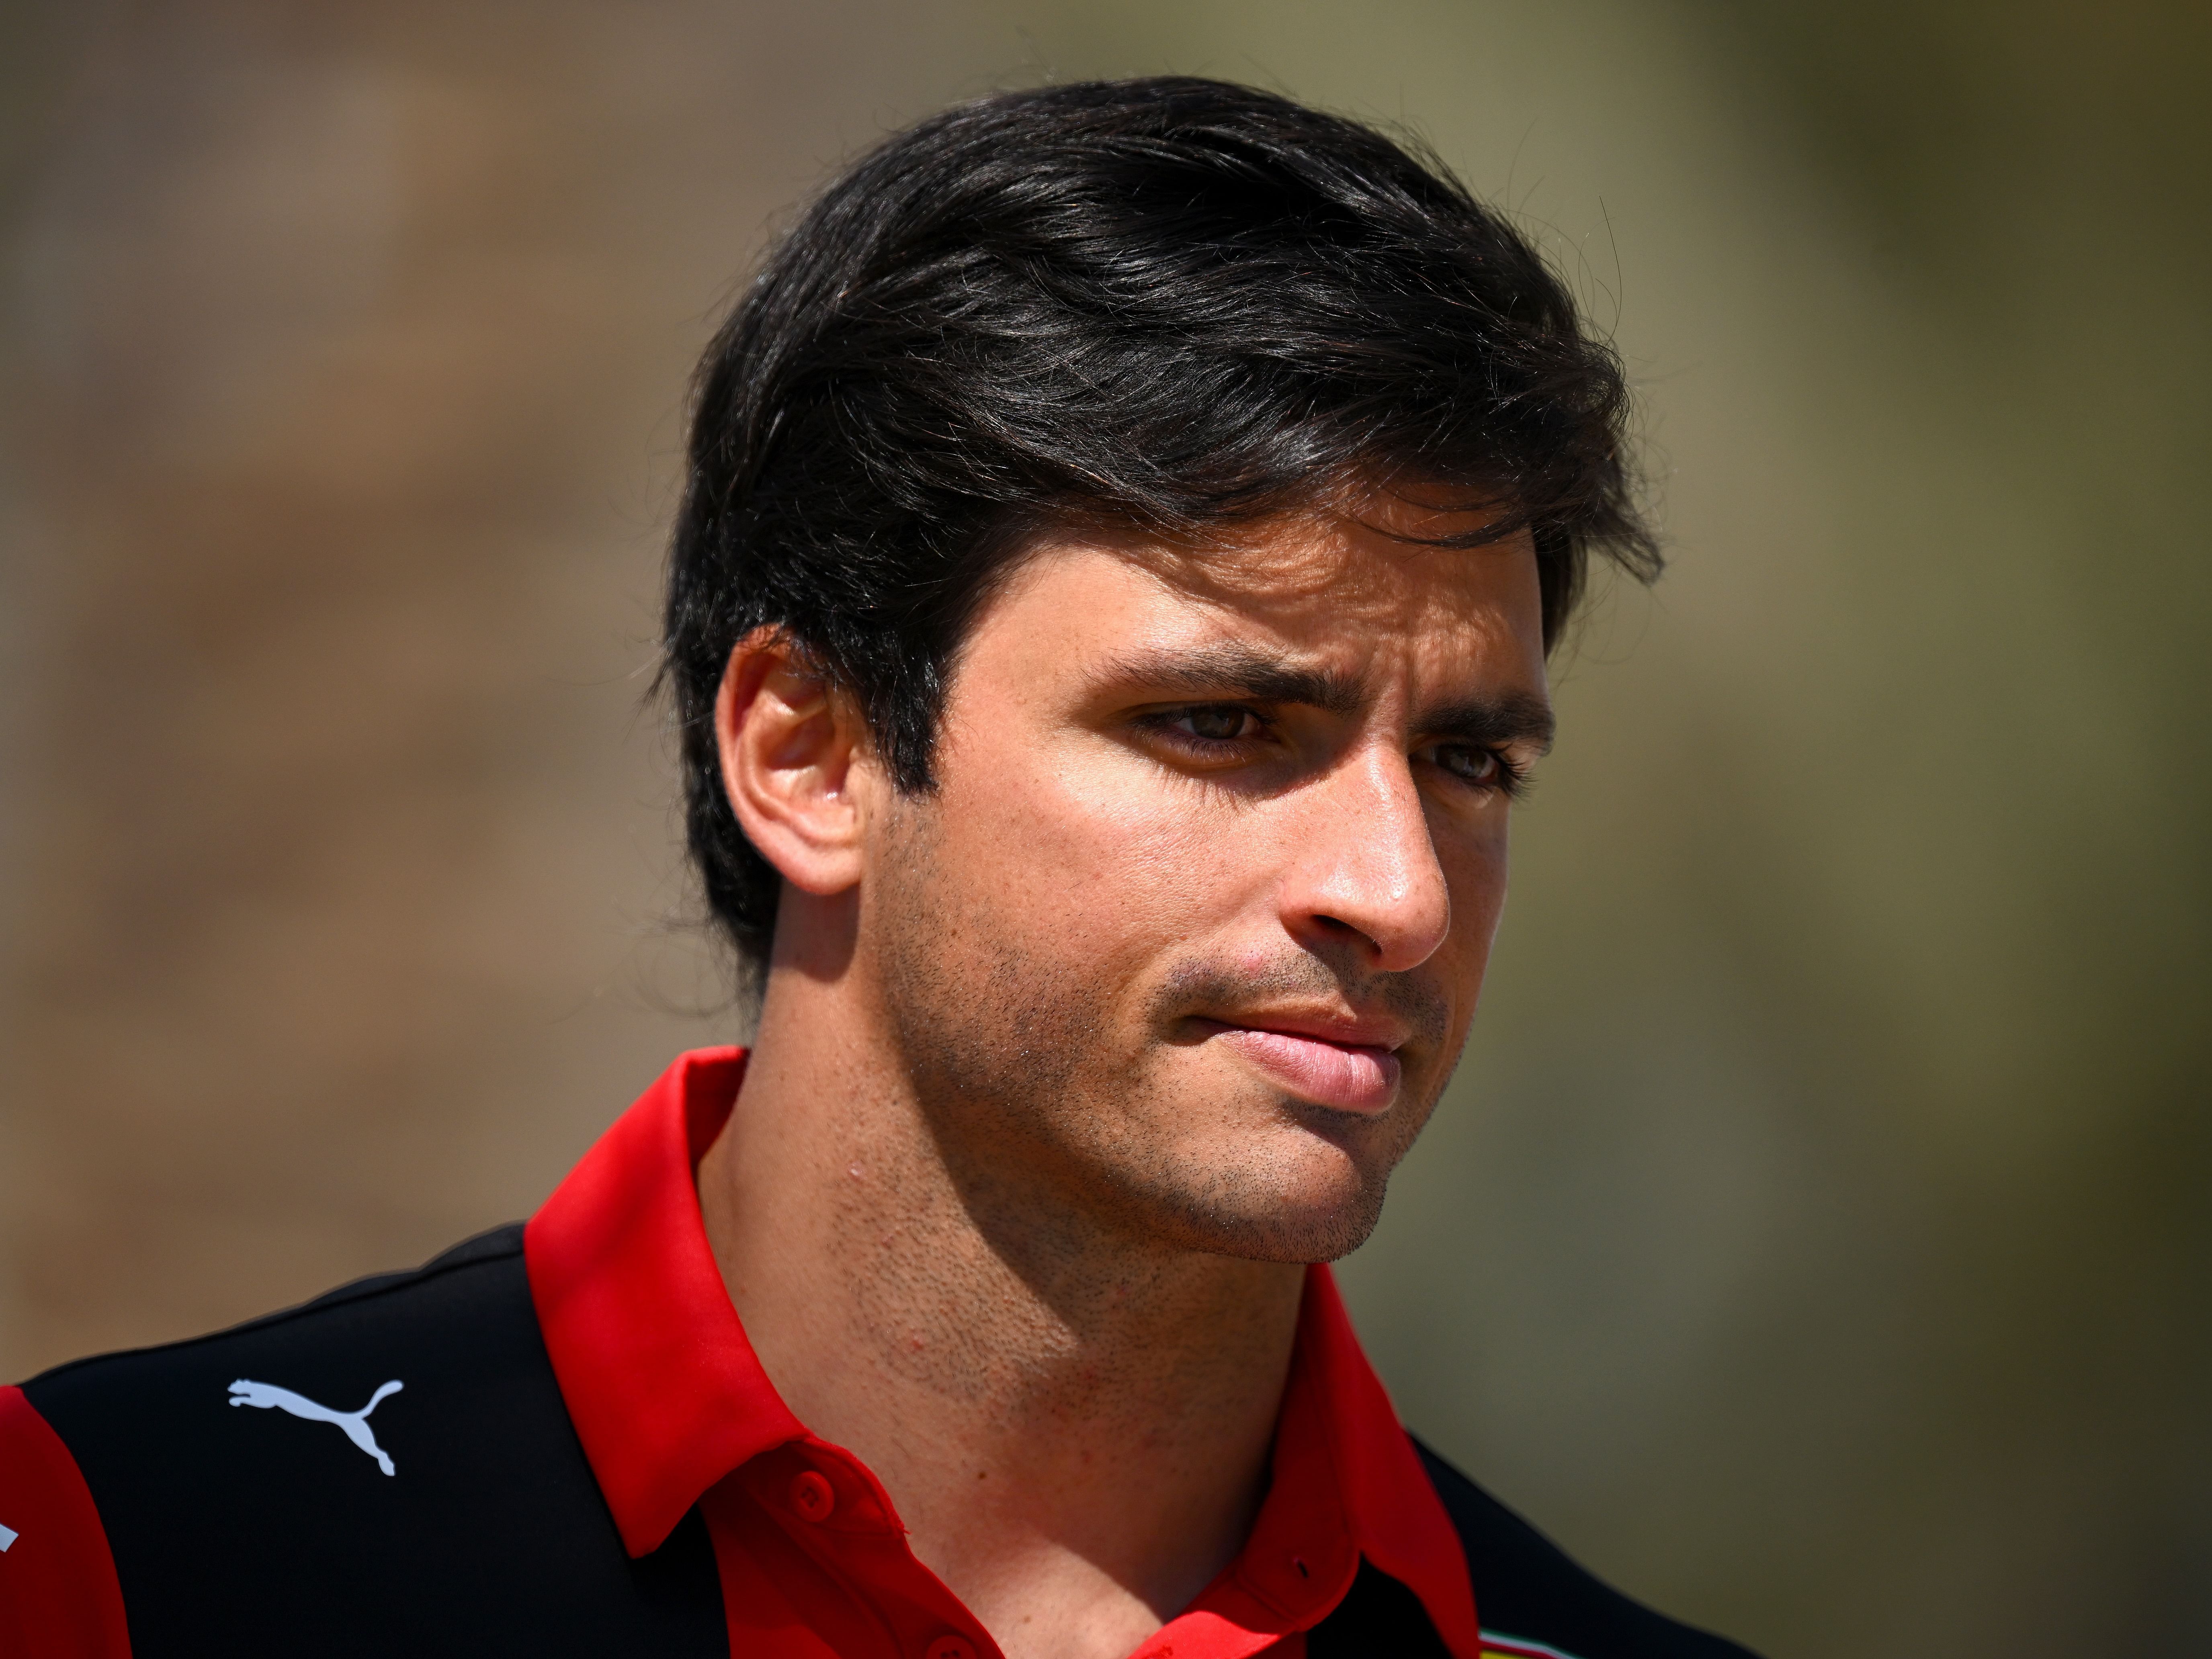 Carlos Sainz walks in the paddock prior to practice ahead of the 2023 F1 Bahrain Grand Prix. (Photo by Clive Mason/Getty Images)